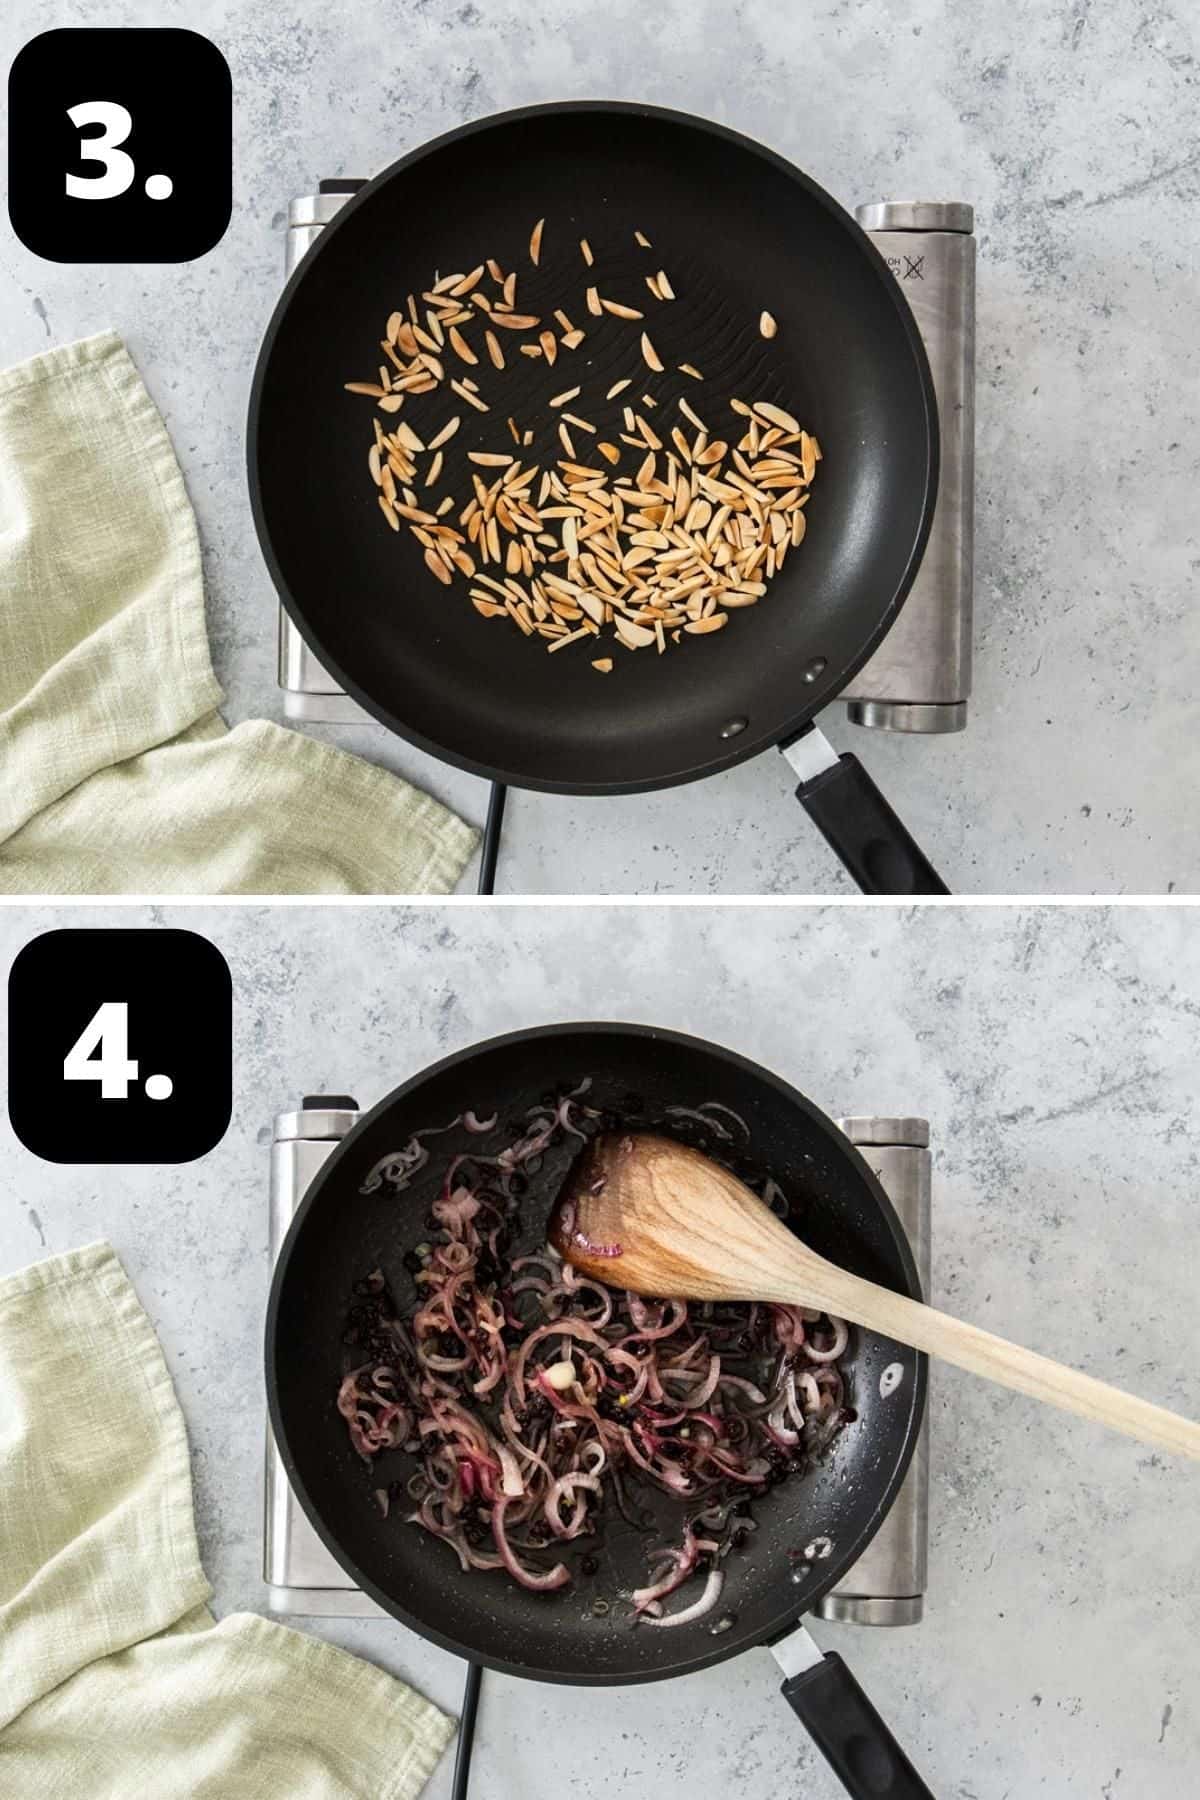 Steps 3-4 of preparing this recipe - toasting the almonds in a pan and cooking the onions in a pan.